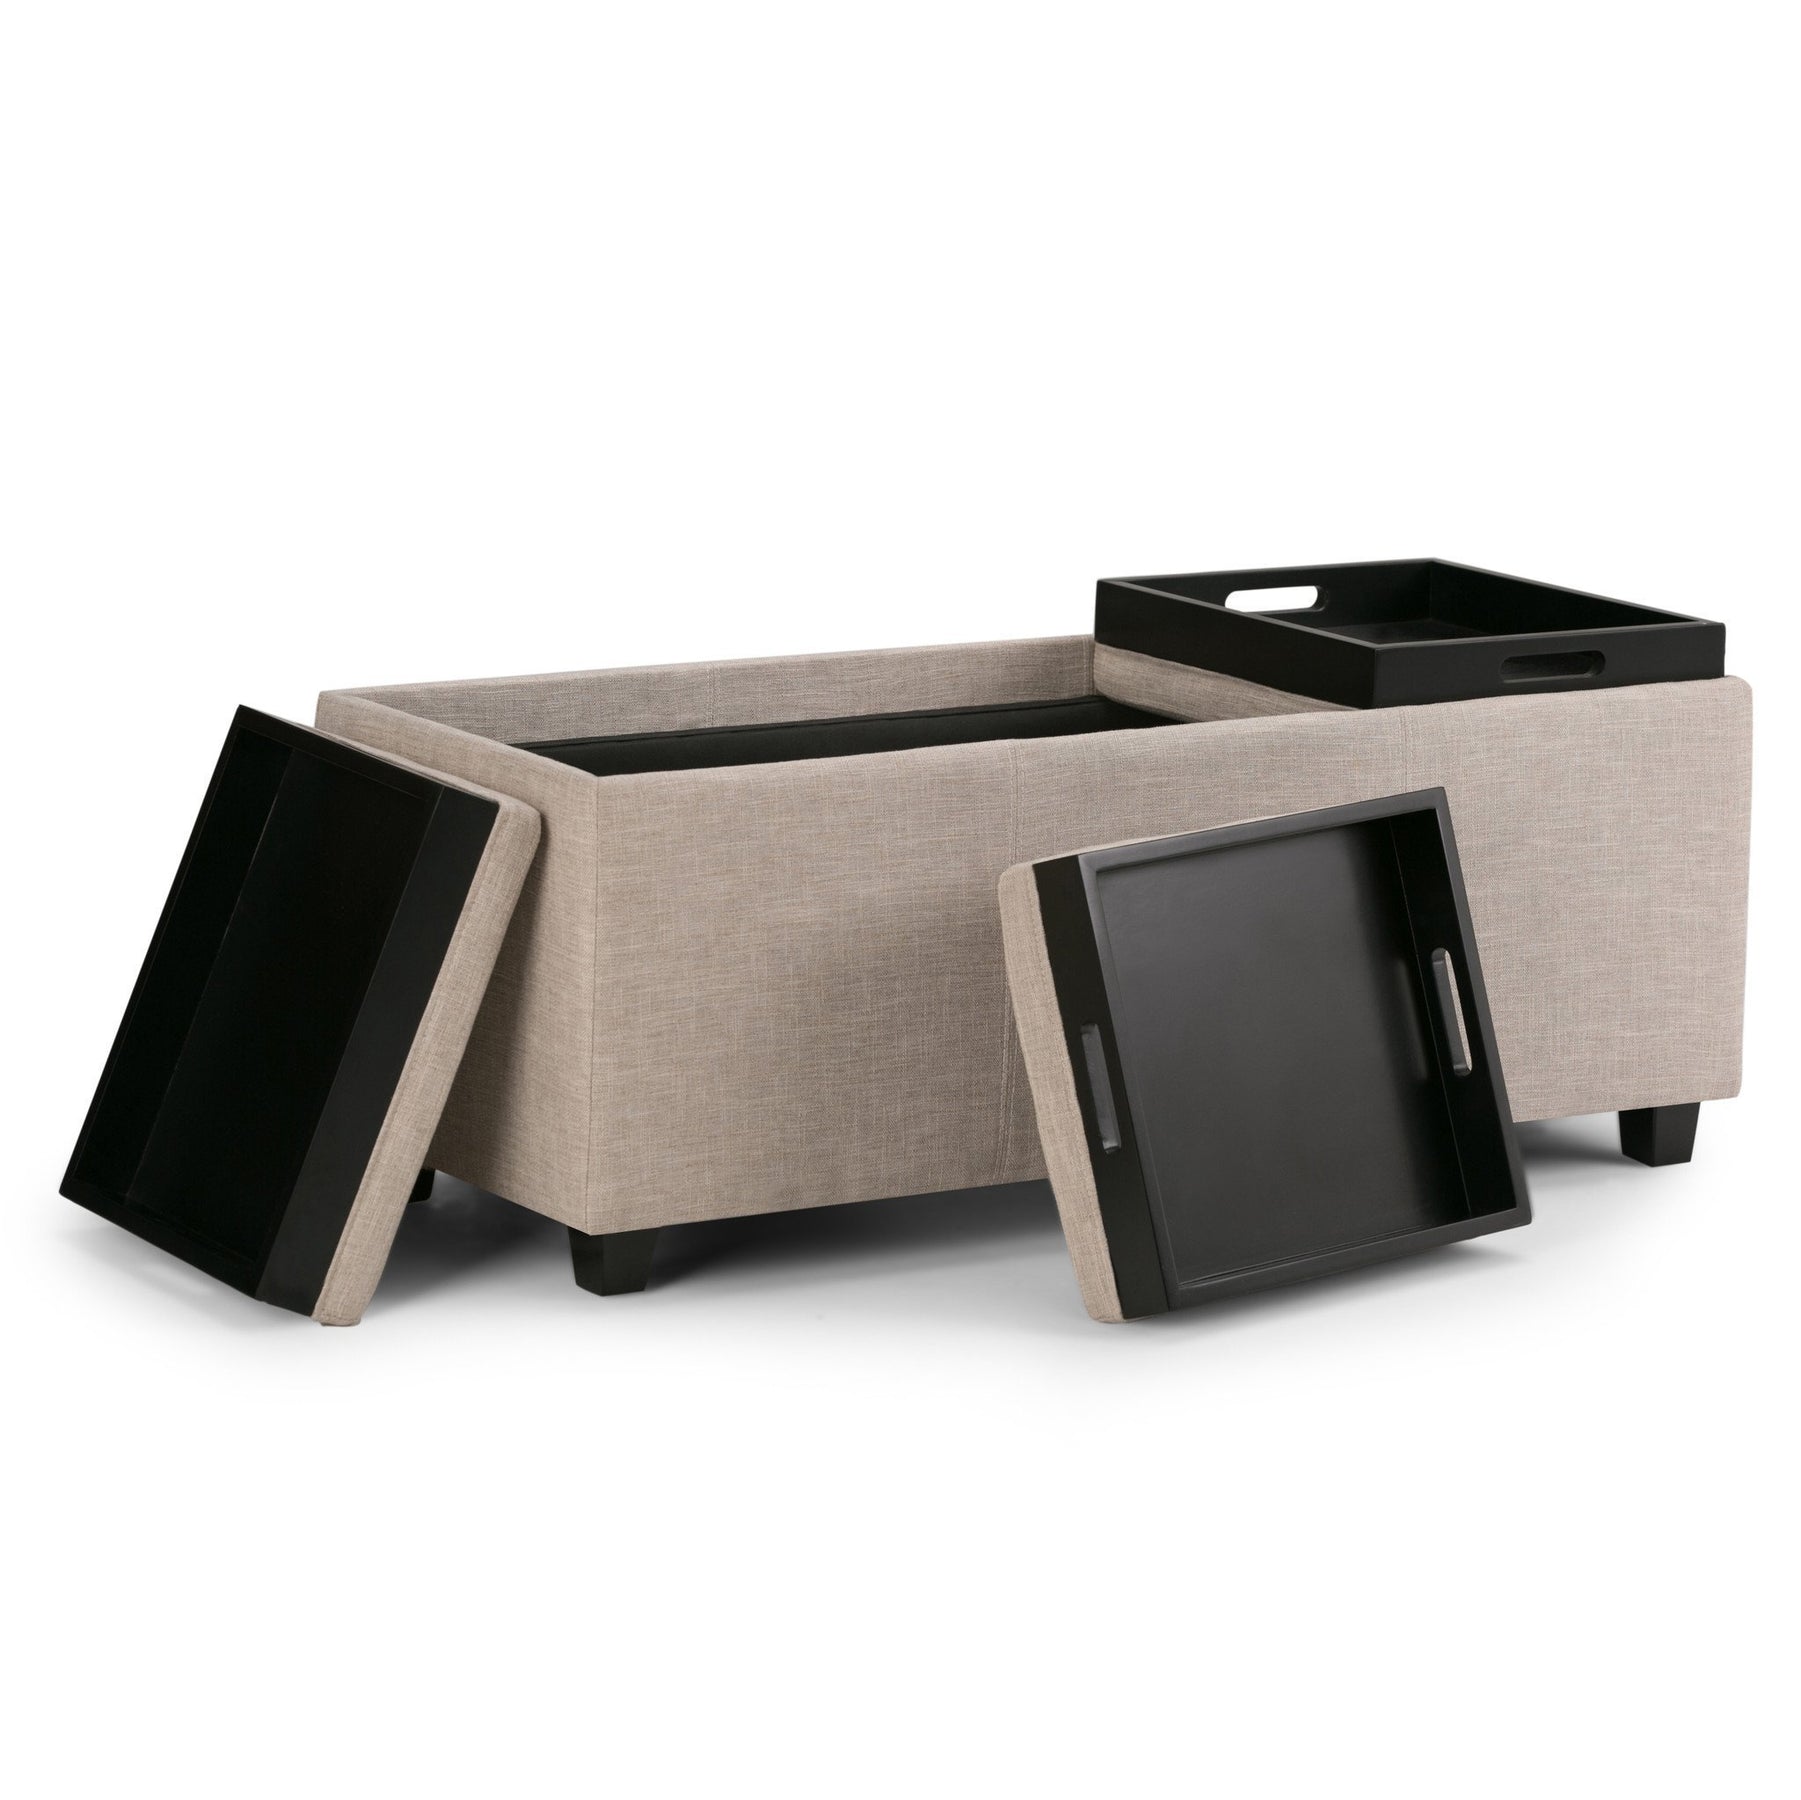 Natural Linen Style Fabric | Avalon Linen Look Storage Ottoman with Three Trays